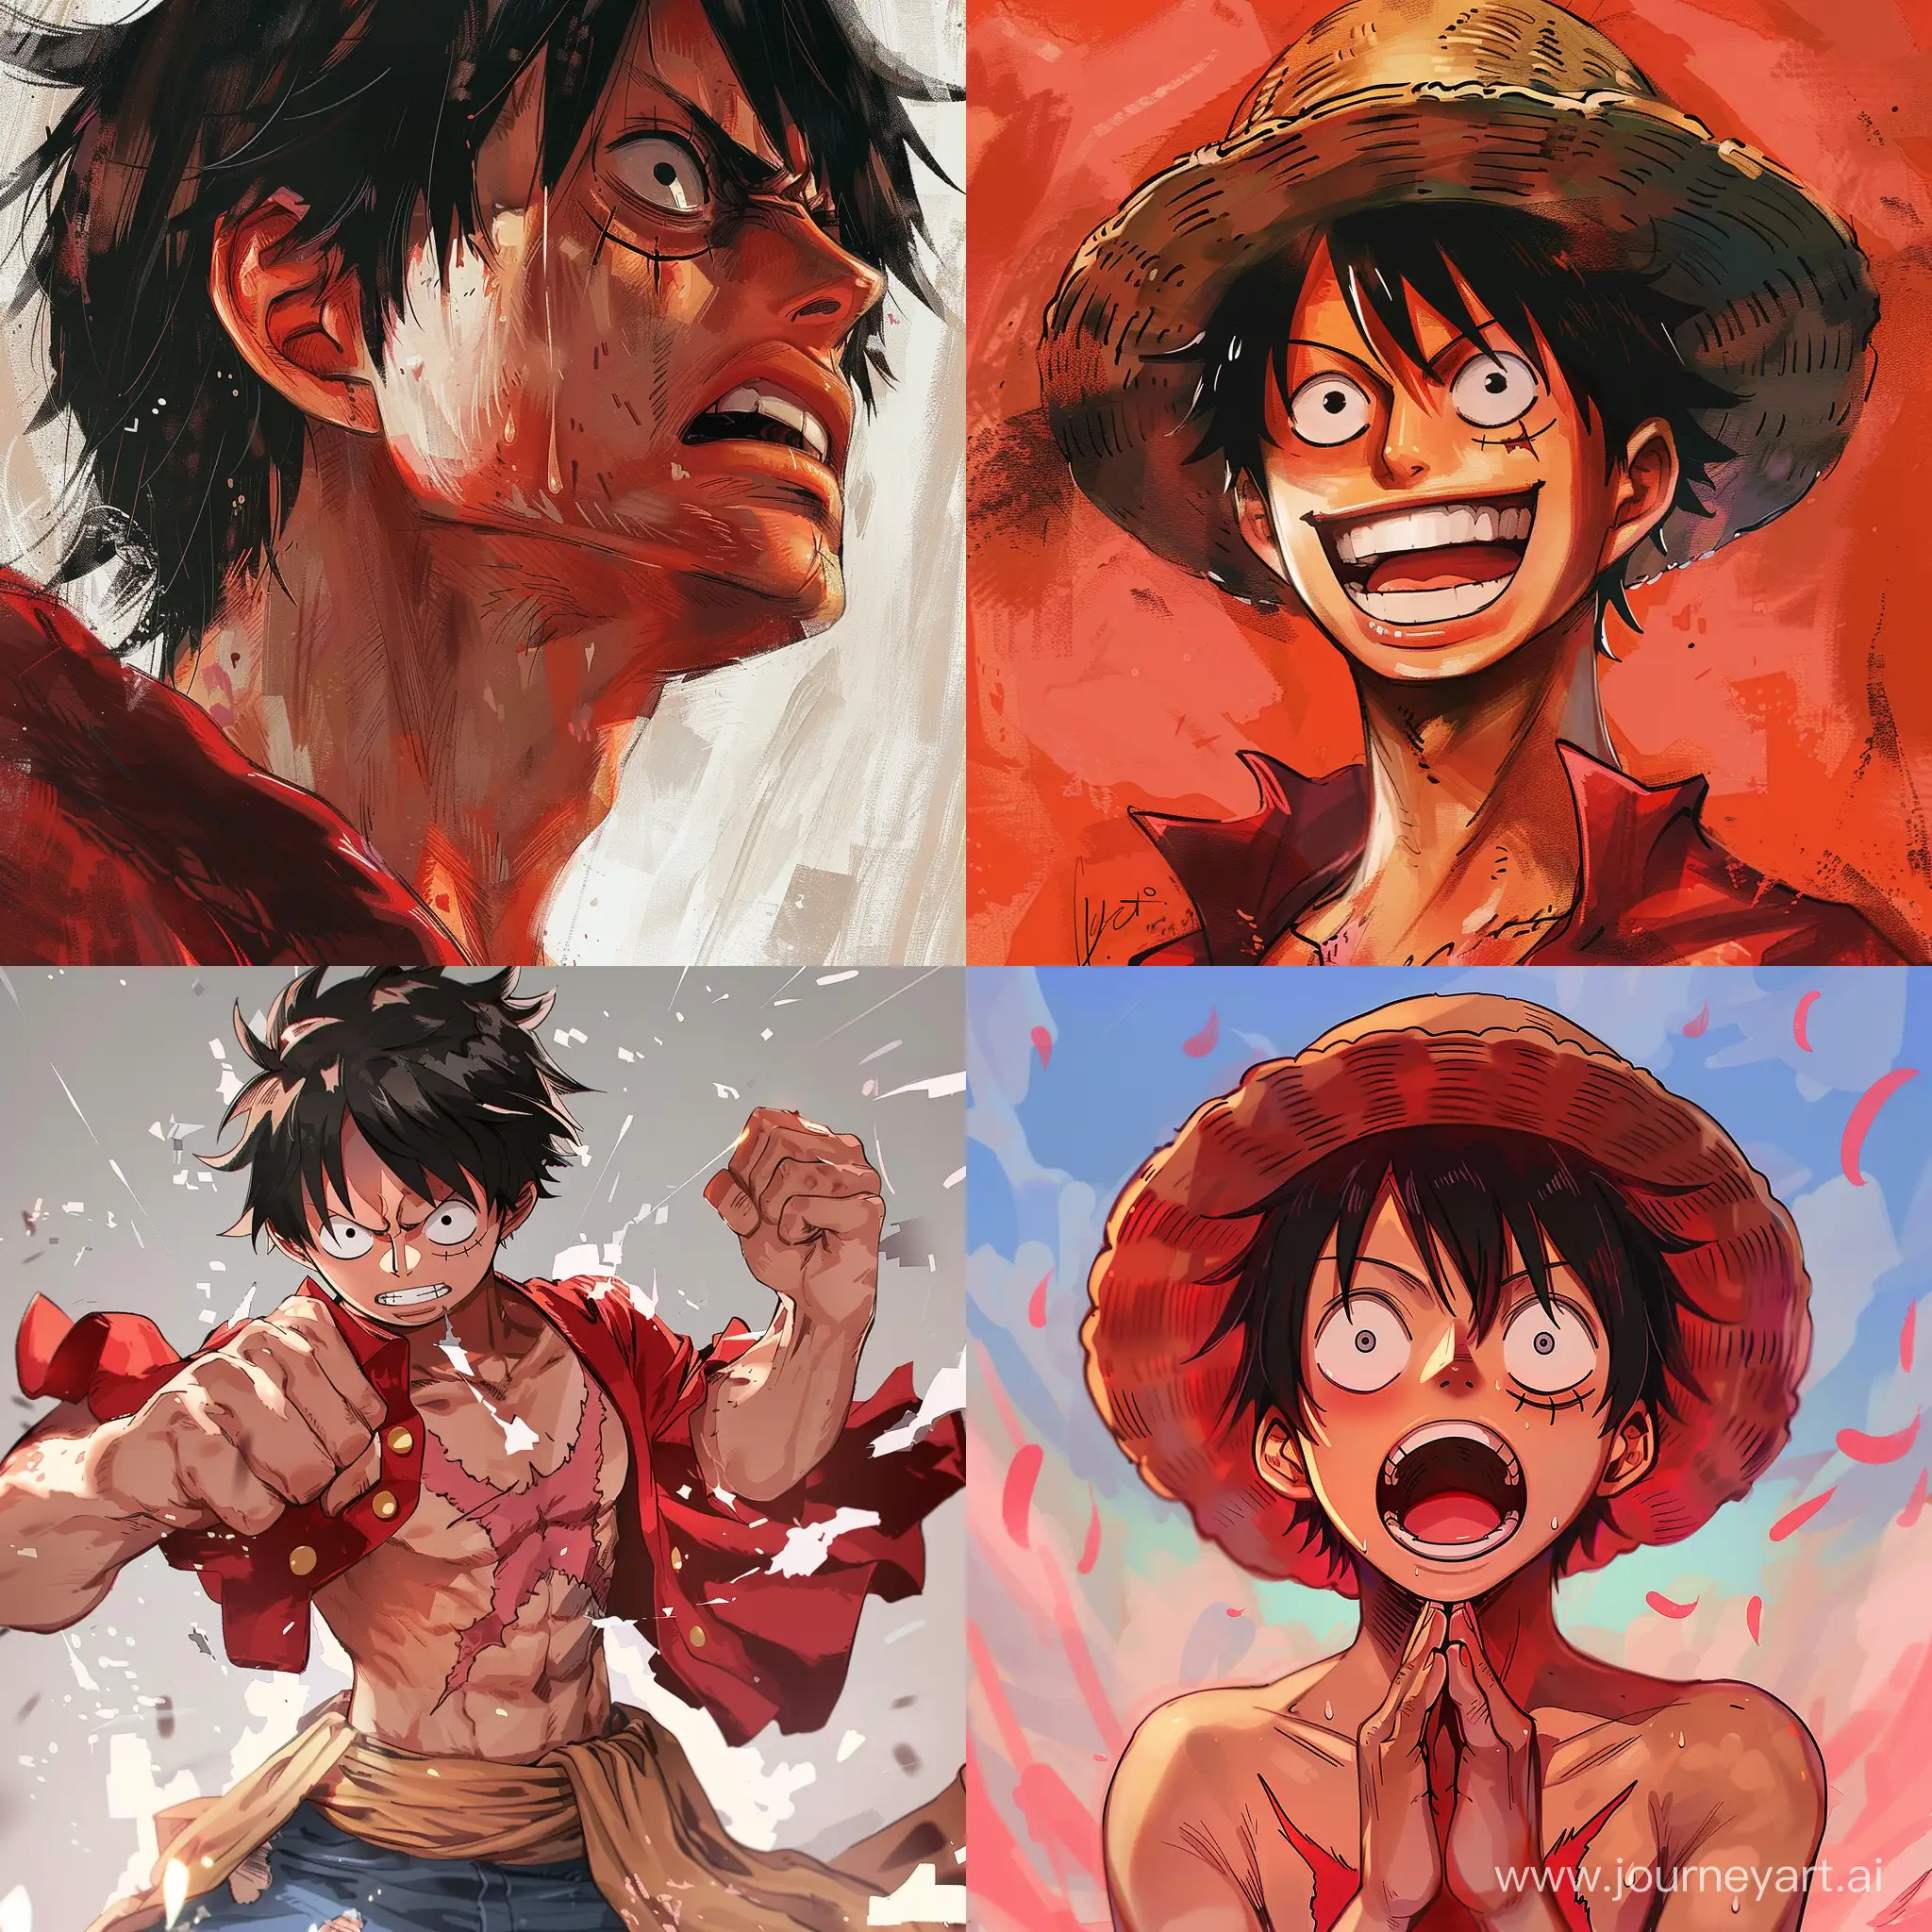 Passionate-Anime-Style-Illustration-of-Luffy